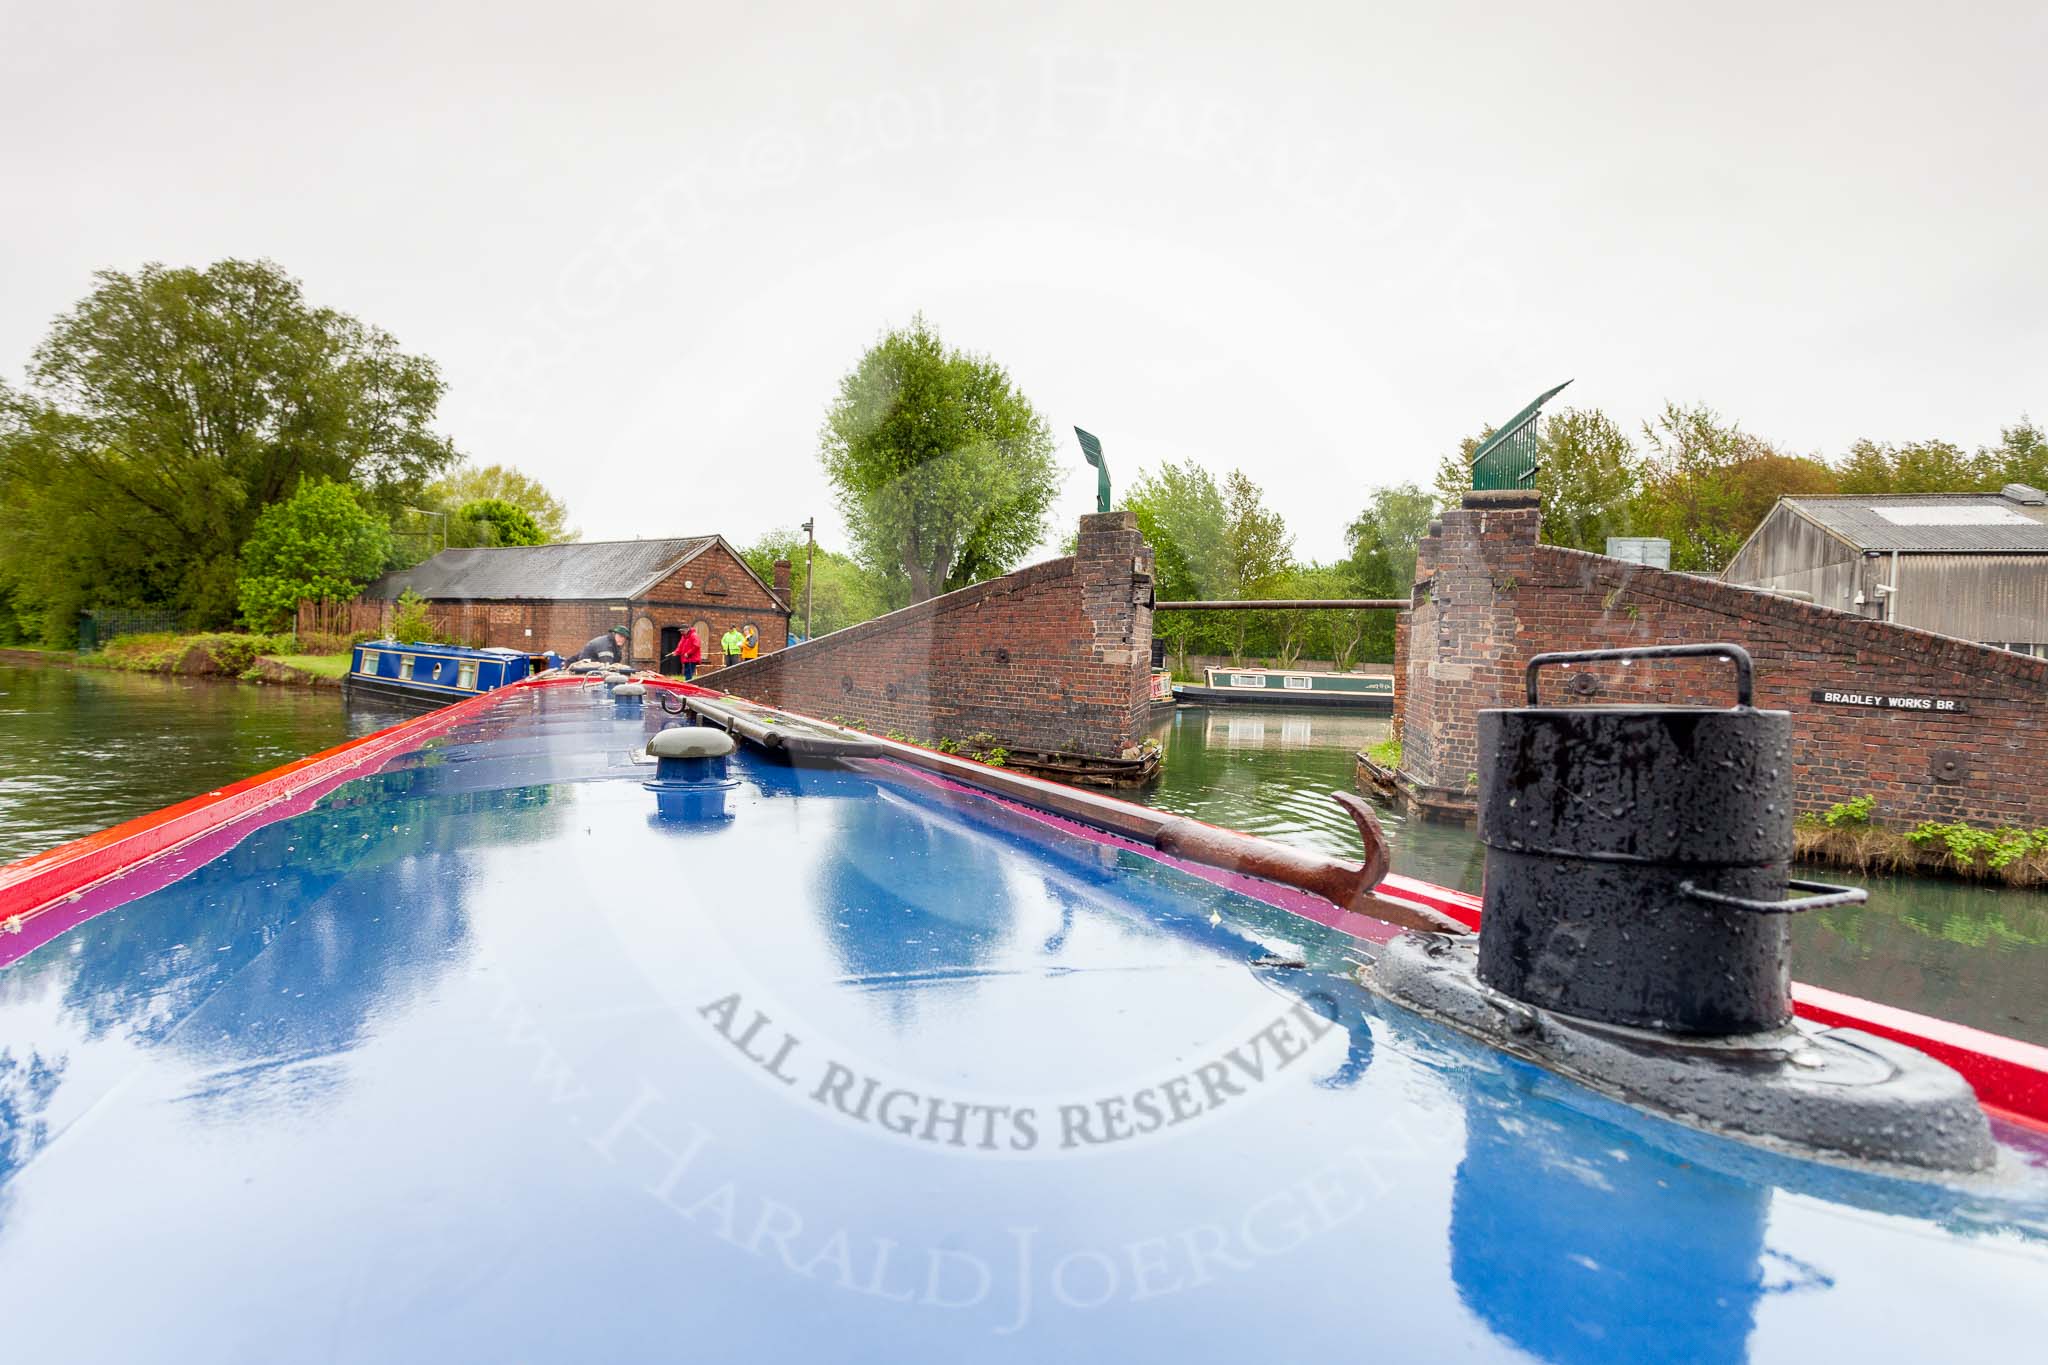 BCN 24h Marathon Challenge 2015: Charley Johnston is steering "Felonious Mongoose" into the basin at Bradley Workshops, the finish of the 2015 BCN Marathon Challenge. The wide able lens used makes the boat appear slight longer.
Birmingham Canal Navigations,



on 24 May 2015 at 09:53, image #188